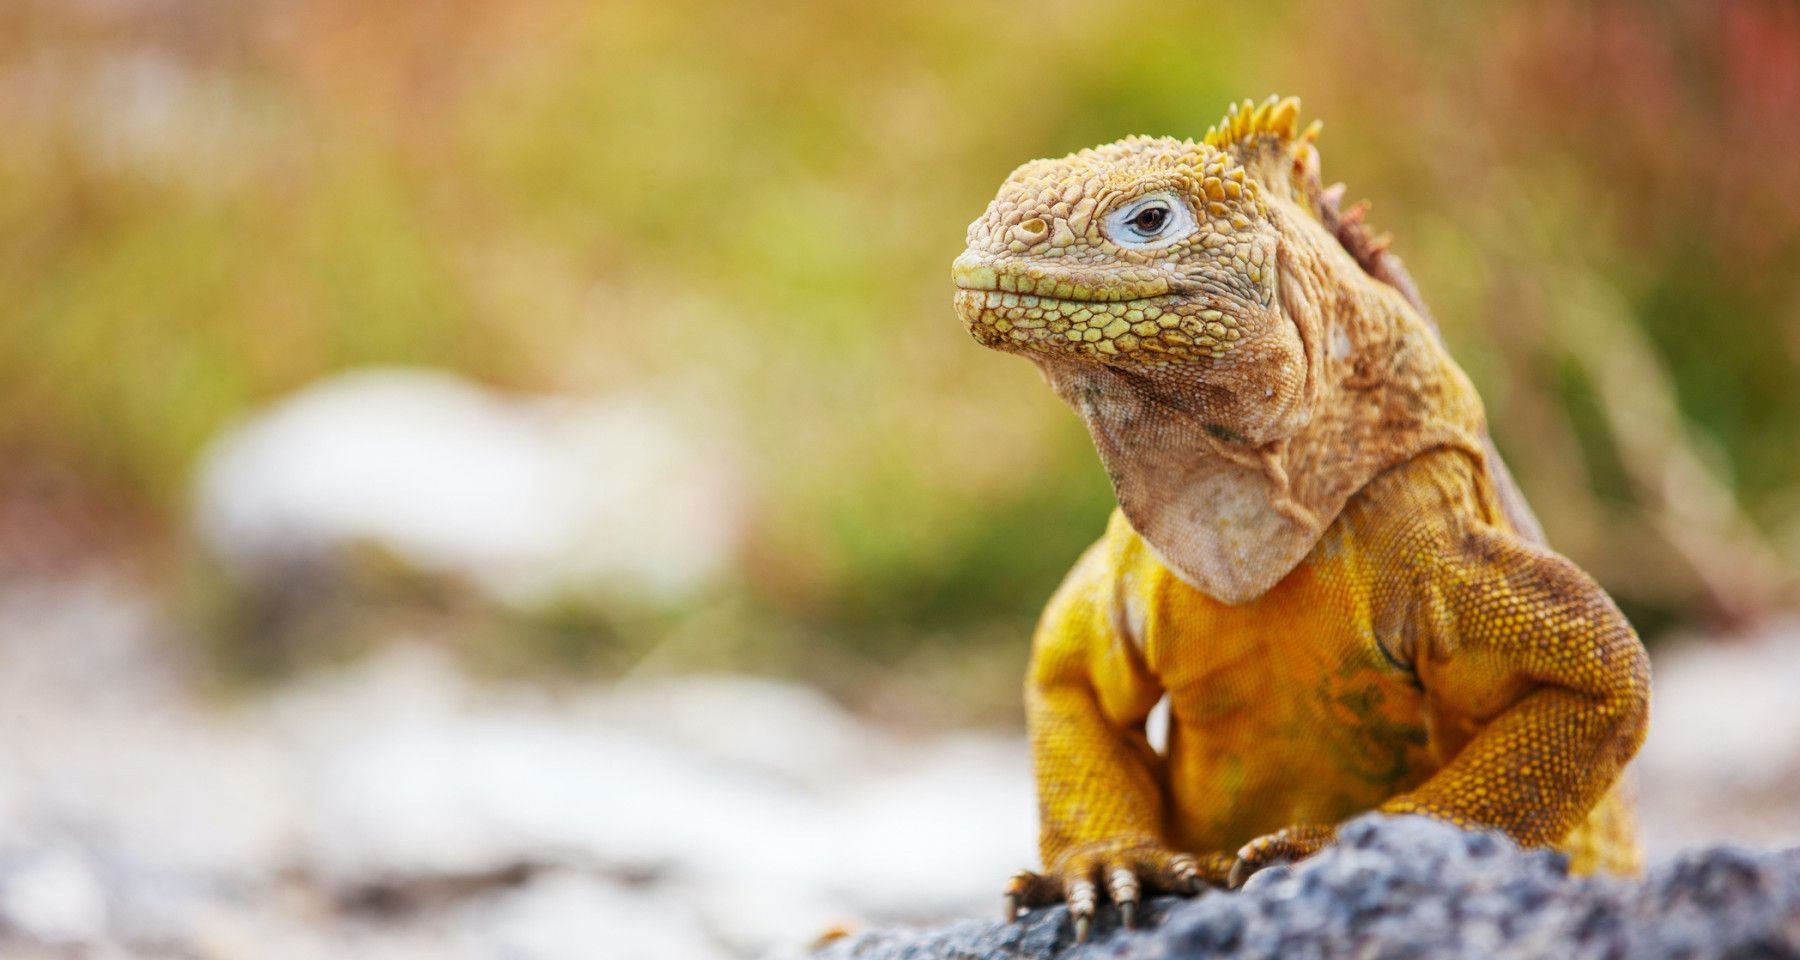 A land iguana on the Galapagos Islands. Photo: Getty.